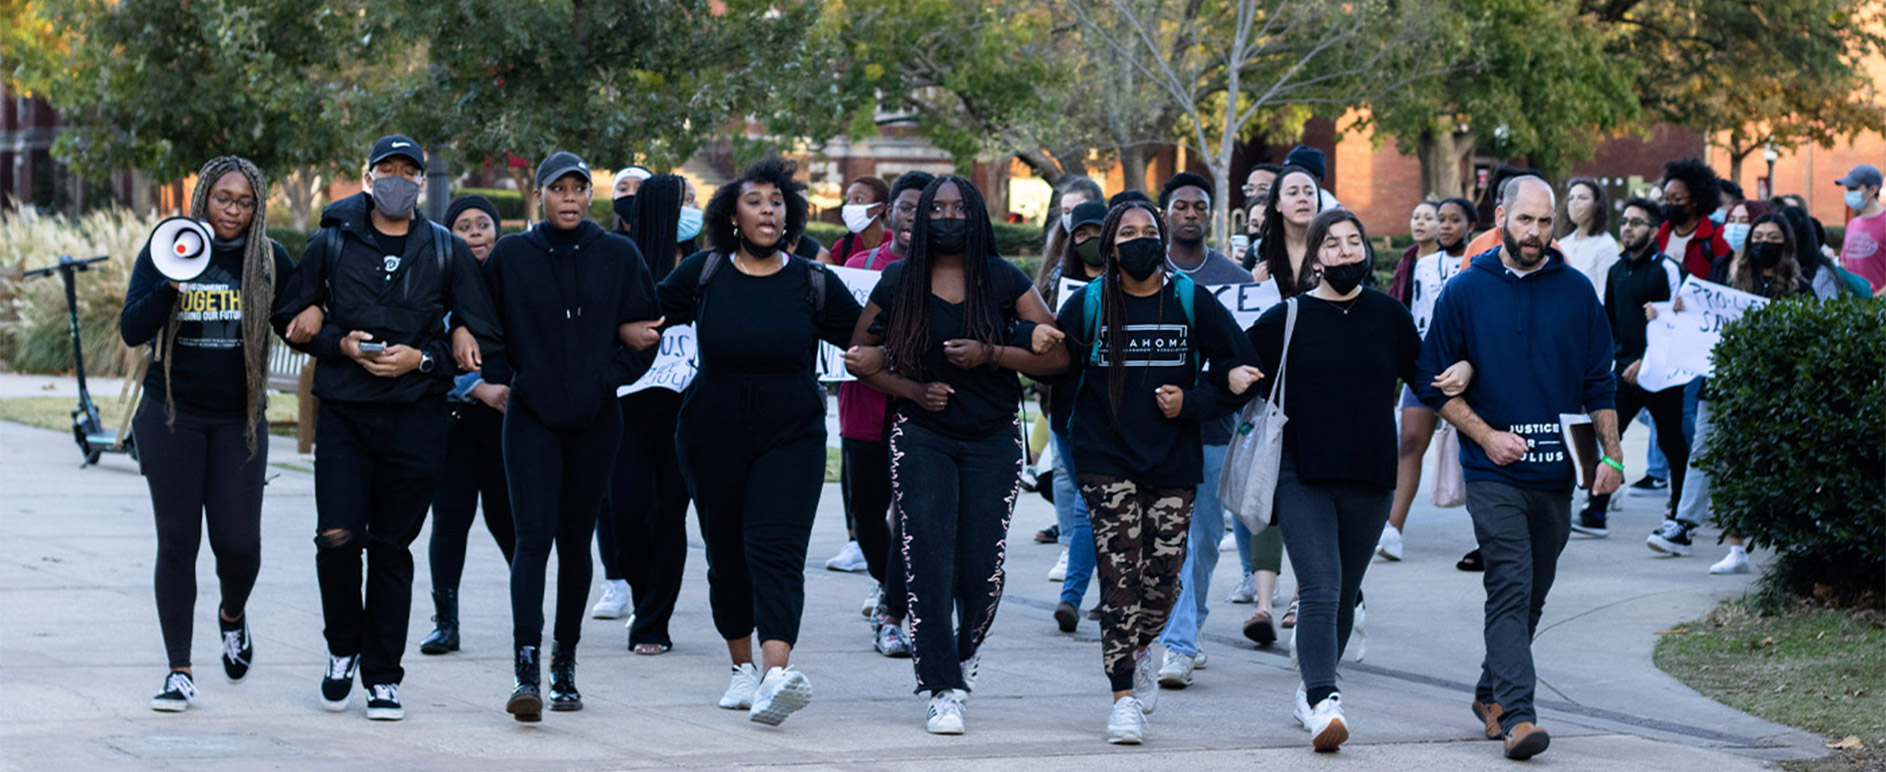 a student march at the University of Oklahoma